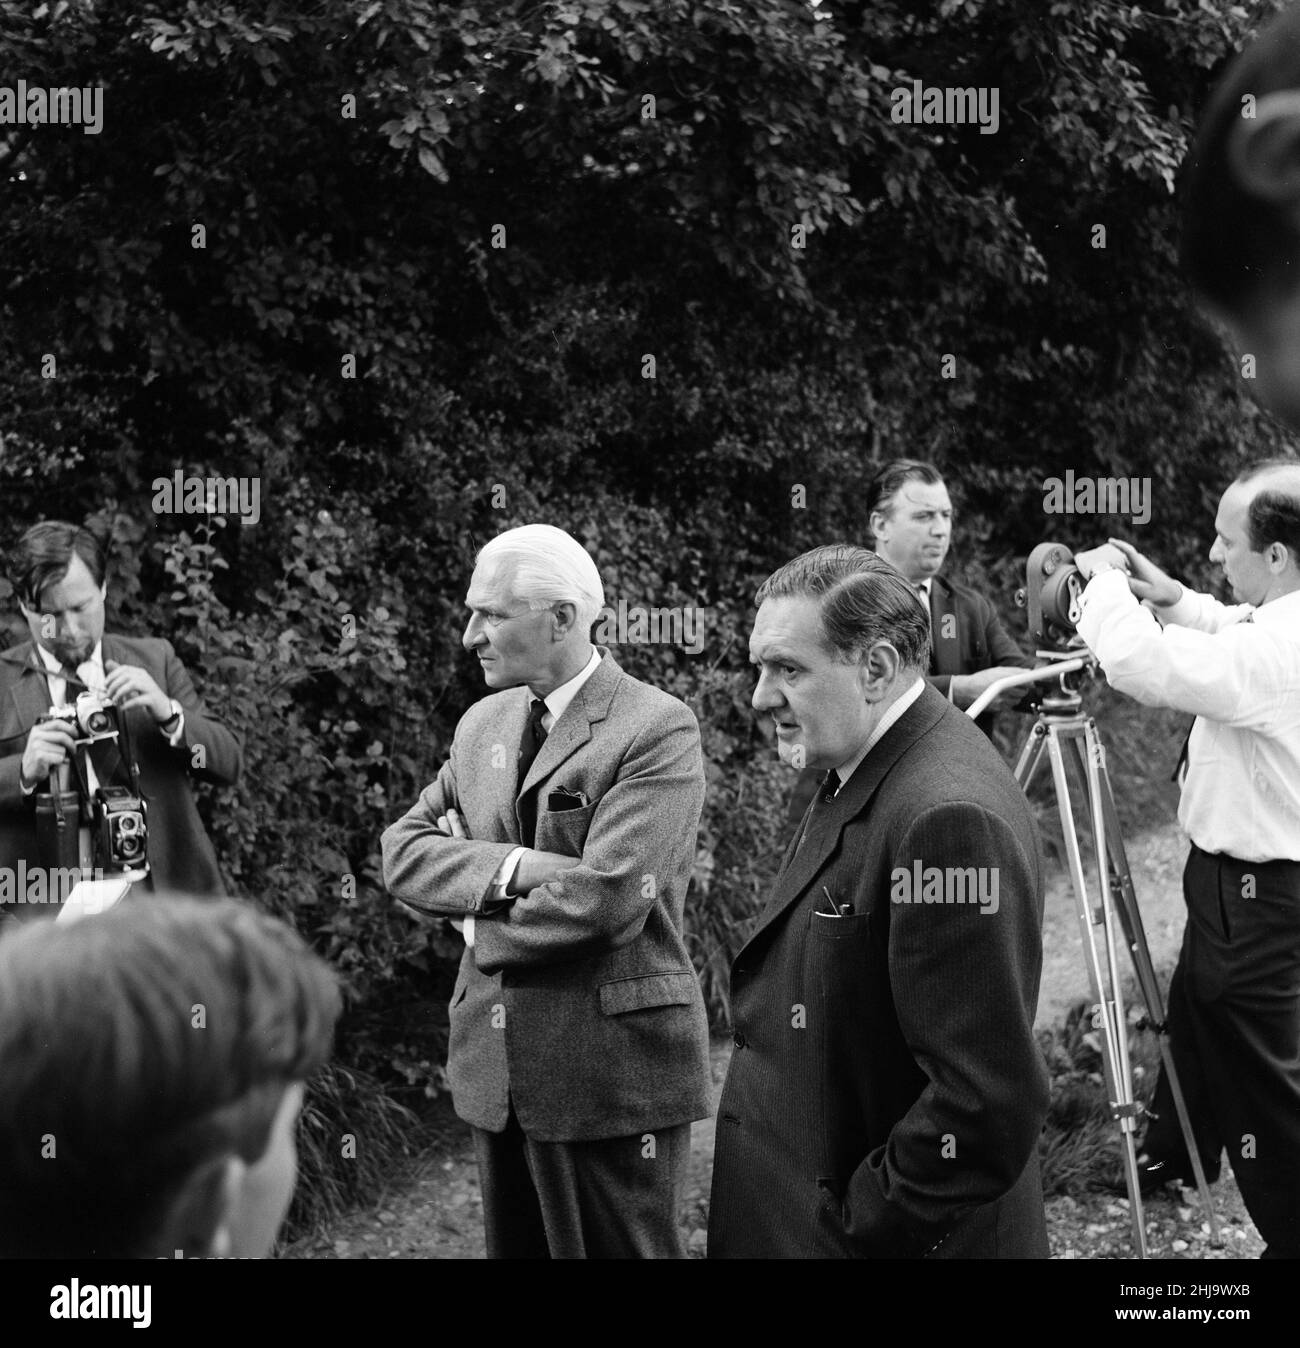 Leatherslade Farm, between Oakley and Brill in Buckinghamshire, hideout used by gang, 27 miles from the crime scene, Tuesday 13th August 1963. Our Picture Shows ... Detective Superintendent Malcolm Fewtrell (left) Head of Buckinghamshire CID and Detective Superintendent Gerald McArthur of Scotland Yard discuss there findings with assembled media at remote farmhouse used as hideaway by gang in immediate aftermath of robbery.   The 1963 Great Train Robbery was the robbery of 2.6 million pounds from a Royal Mail train heading from Glasgow to London on the West Coast Main Line in the early hours o Stock Photo